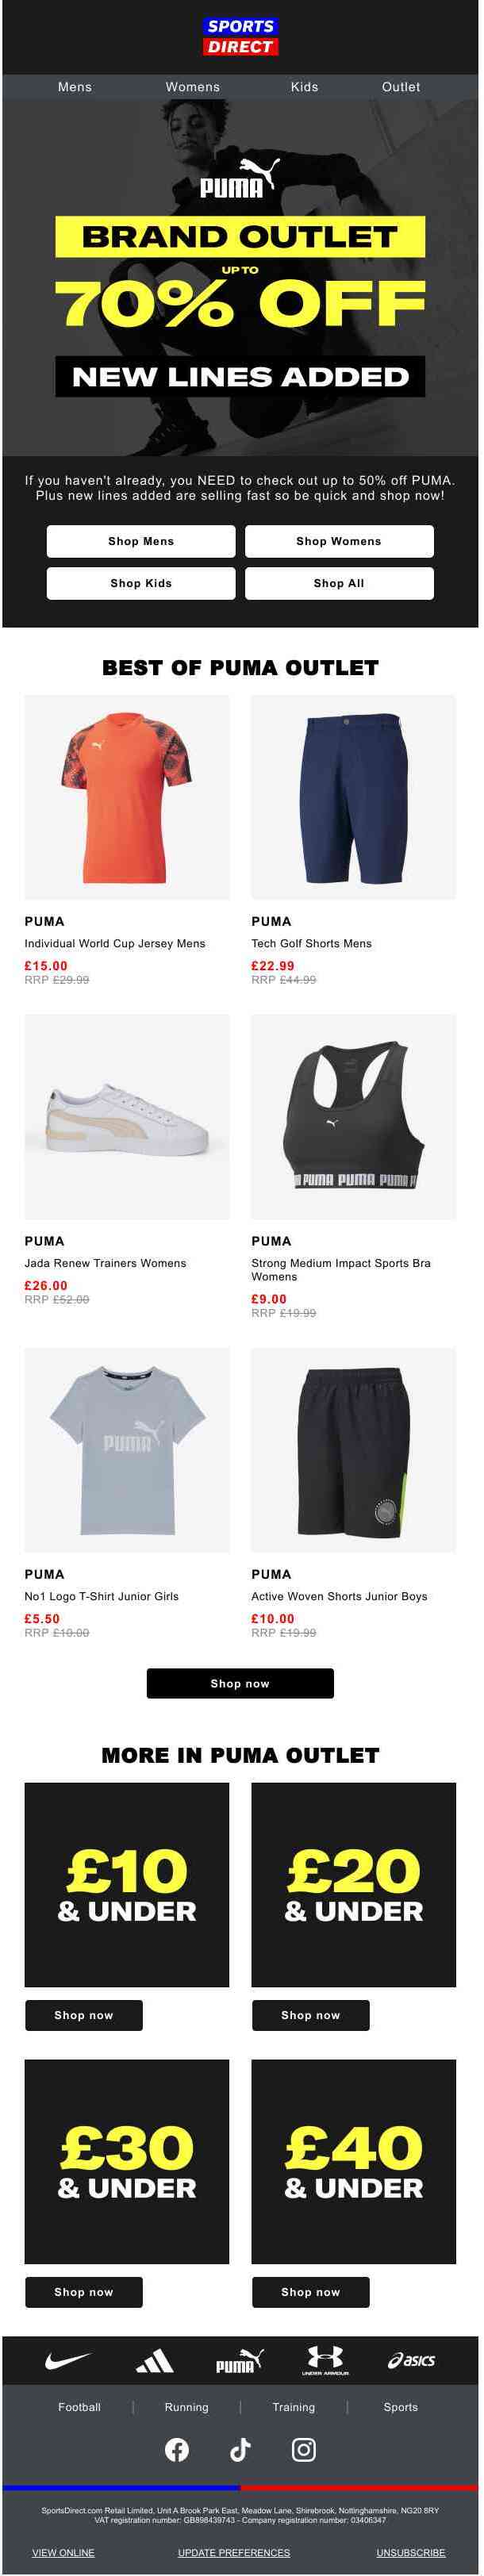 Just in 🔊 New lines added to PUMA Outlet